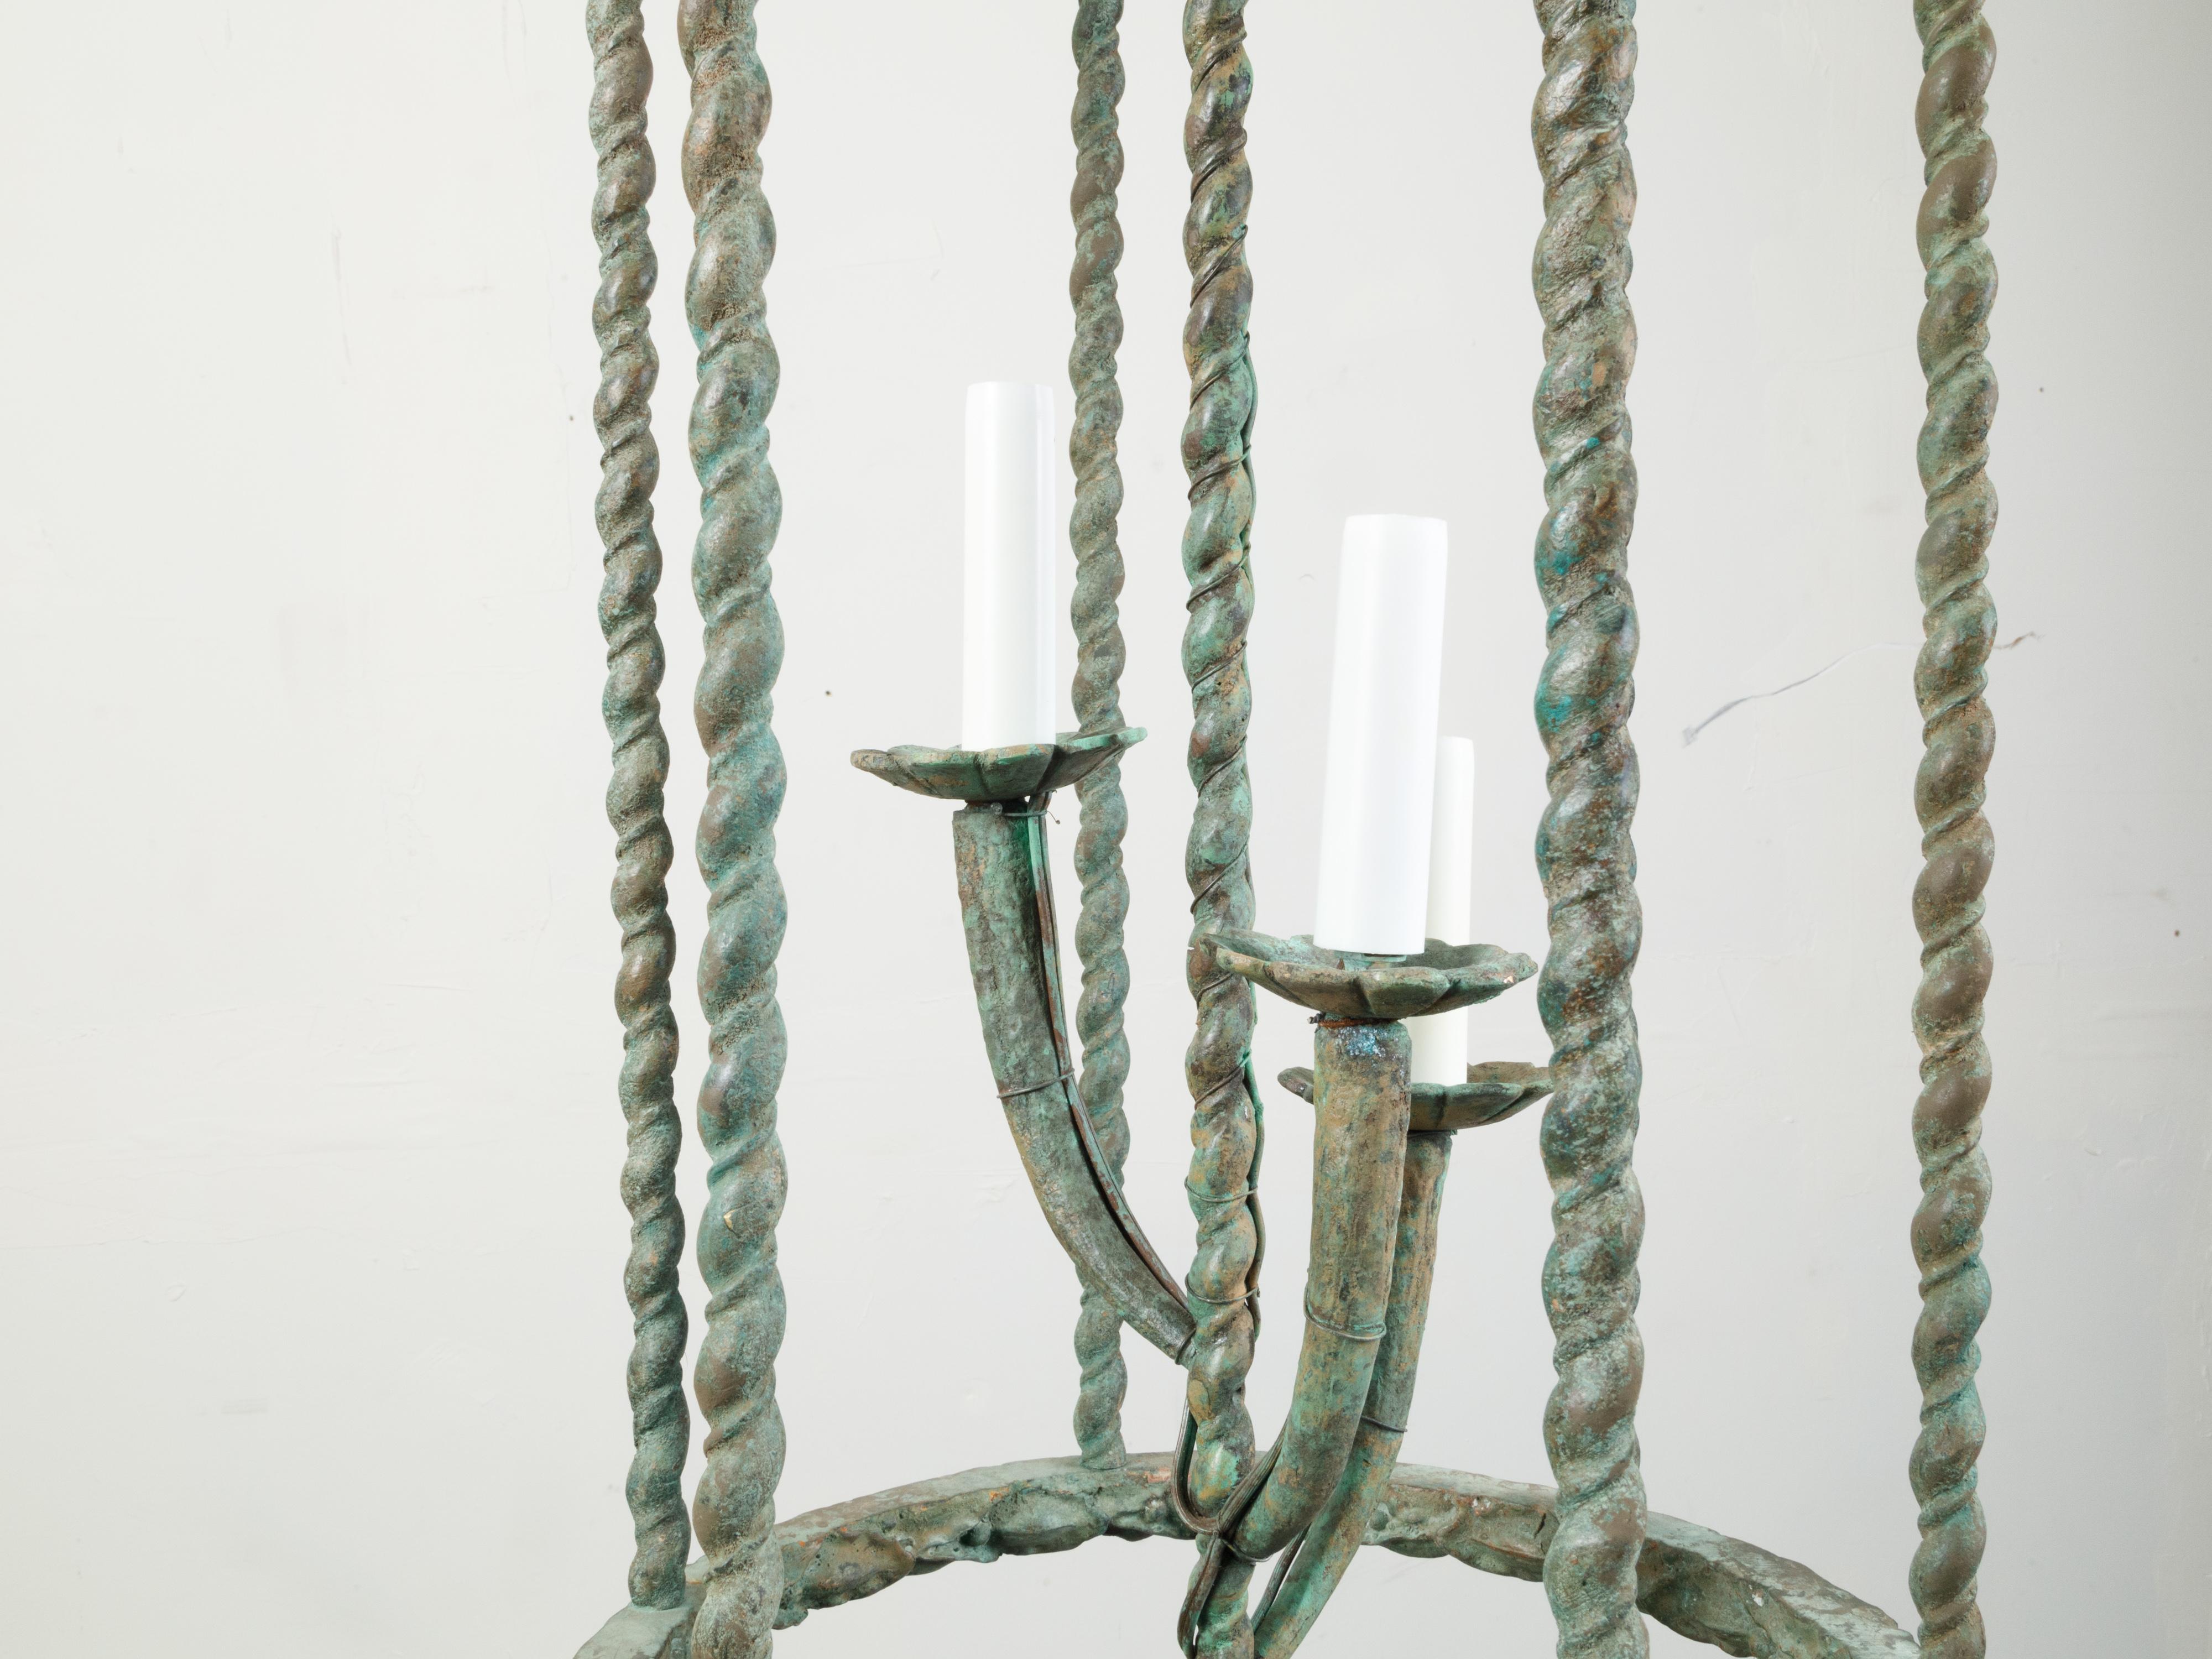 French Midcentury Bronze Three-Lights Lantern with Verdigris Patina In Good Condition For Sale In Atlanta, GA